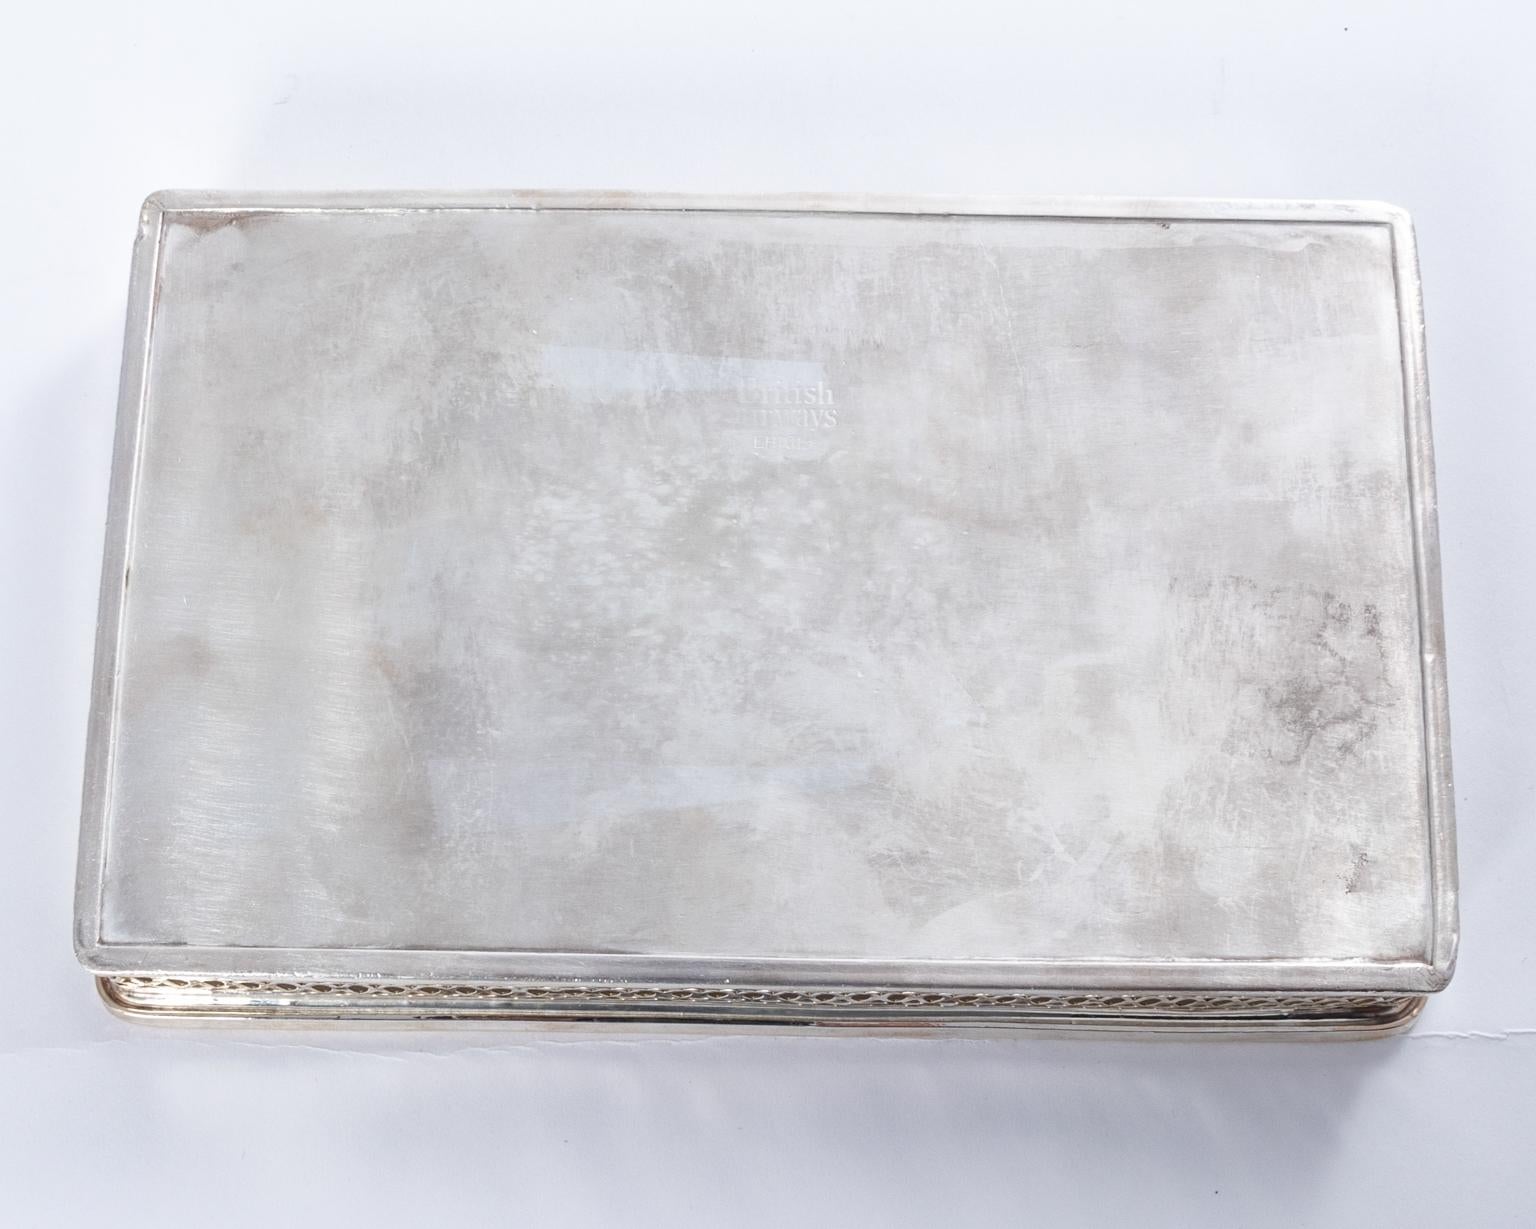 20th Century Silver Plated Tray by British Airways